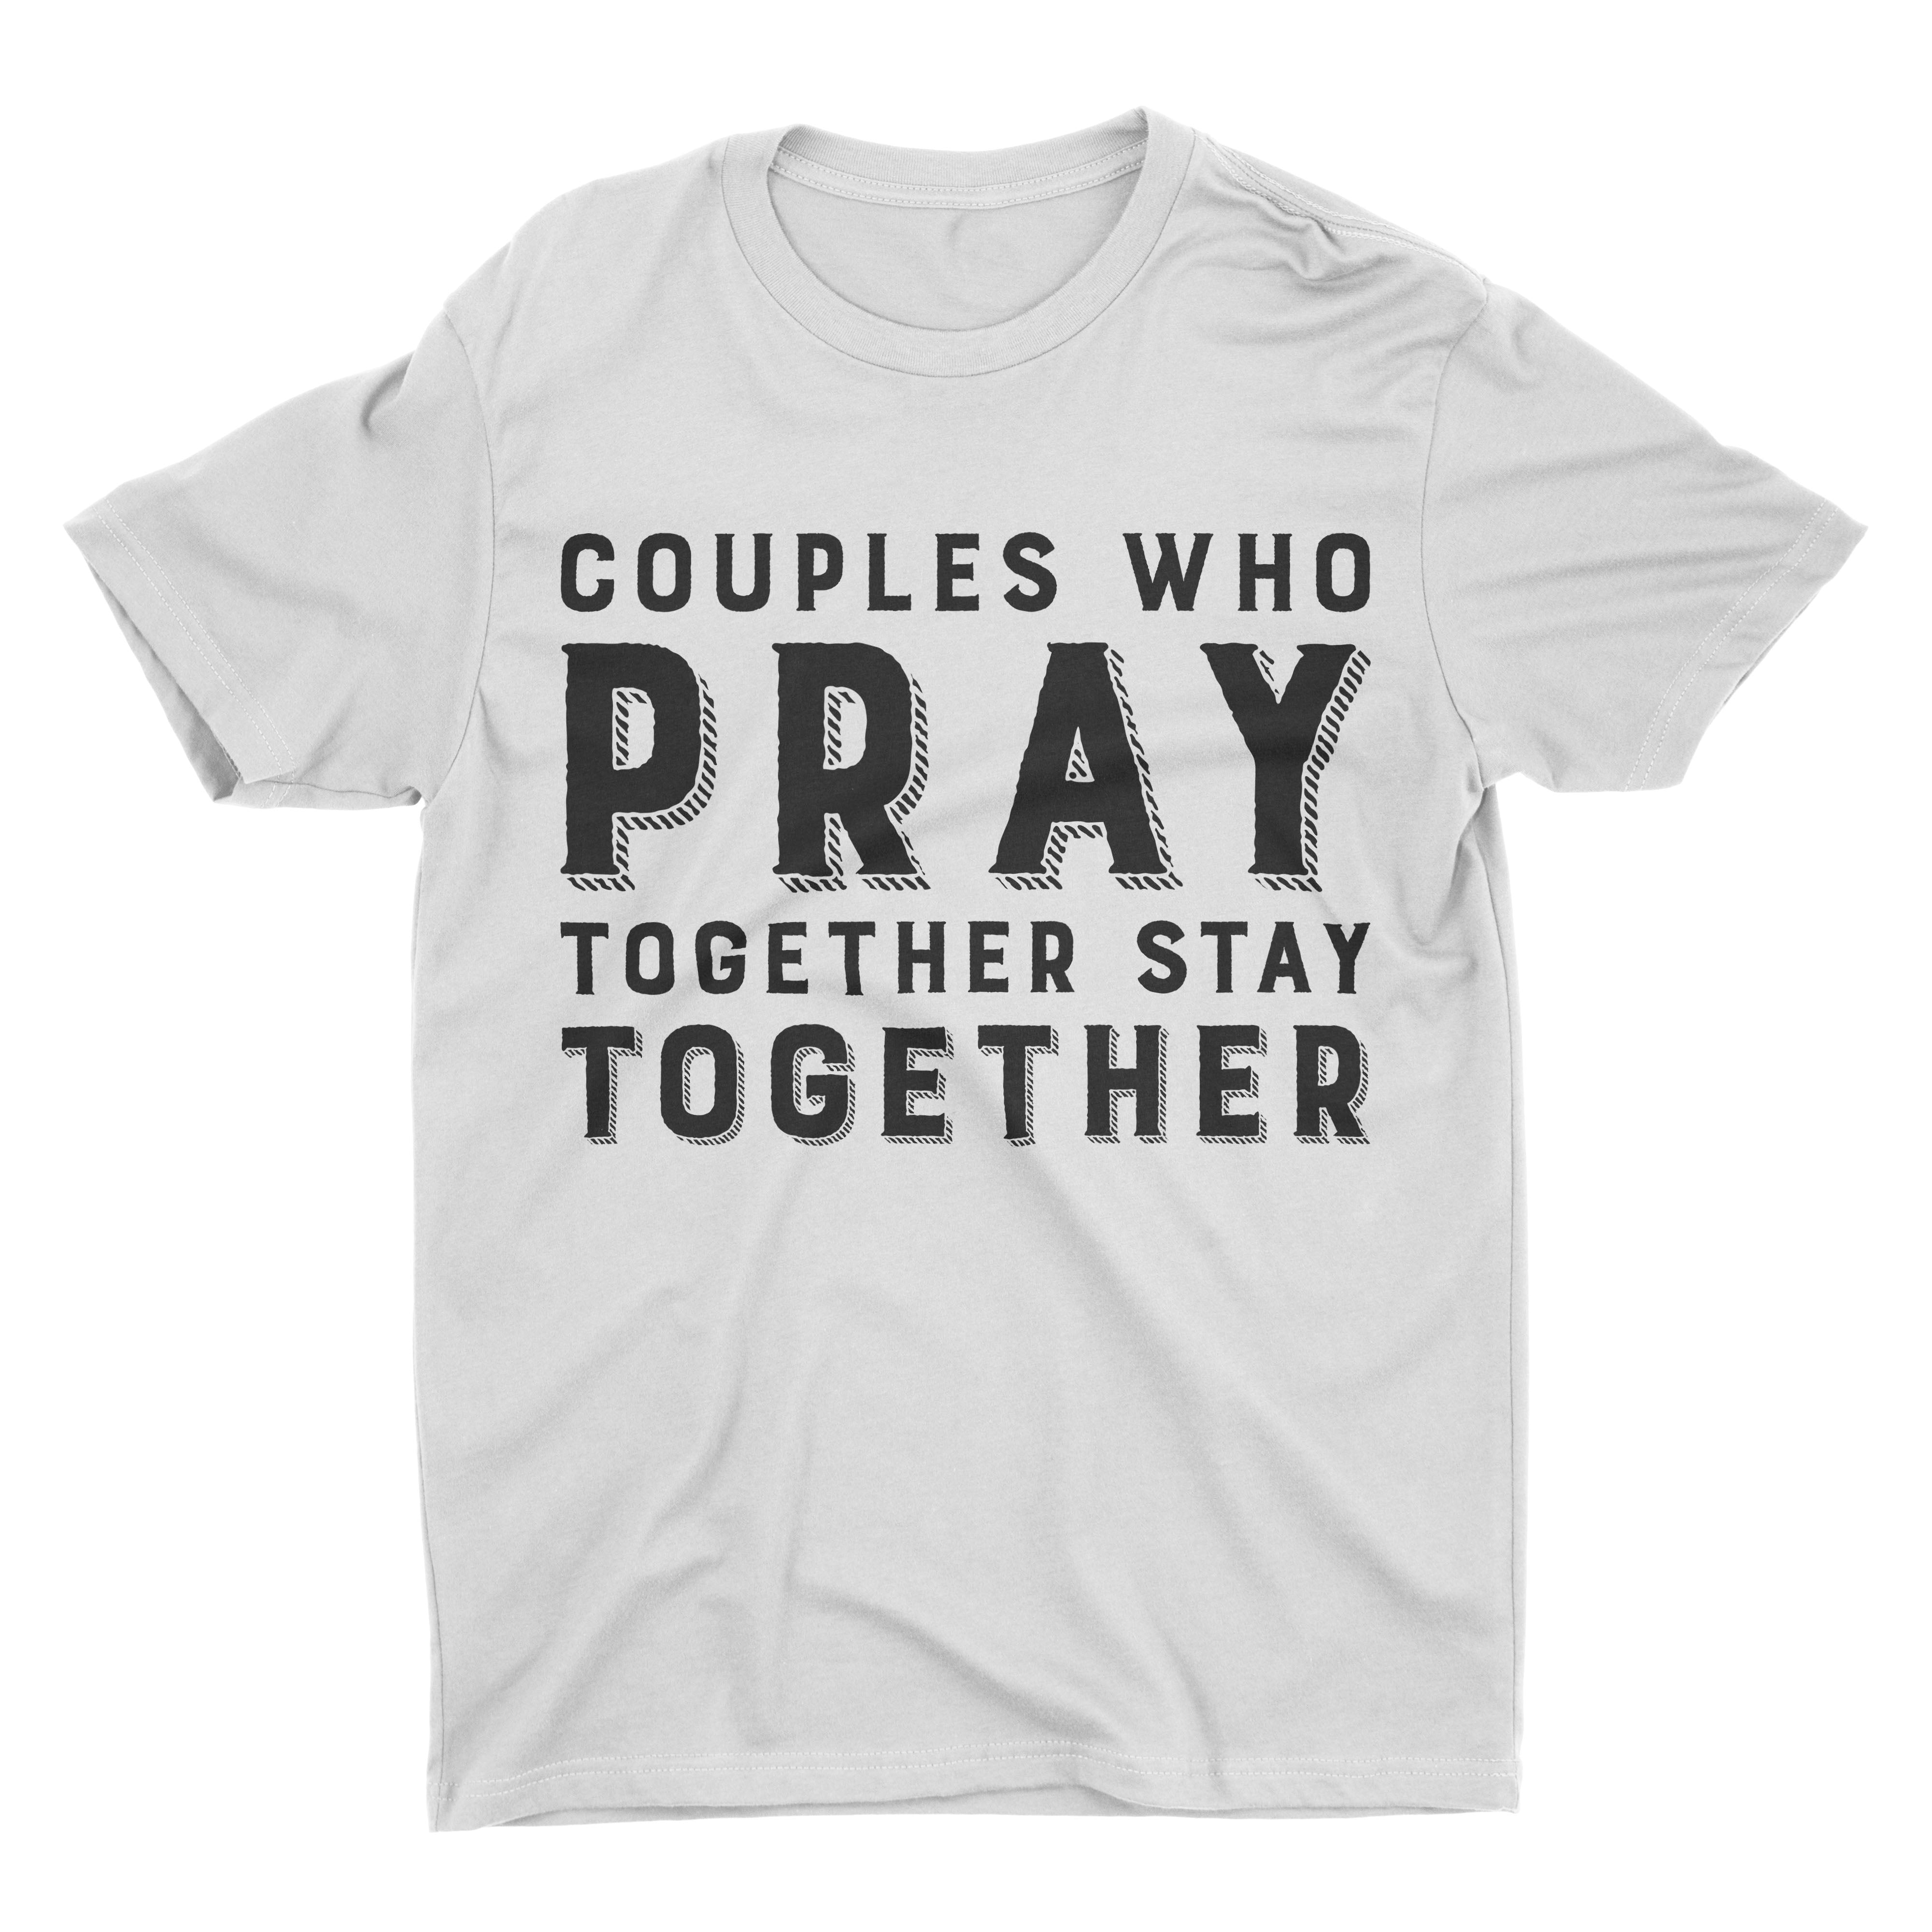 Couples Who Pray Together Stay Together -Two t-shirts for one price!